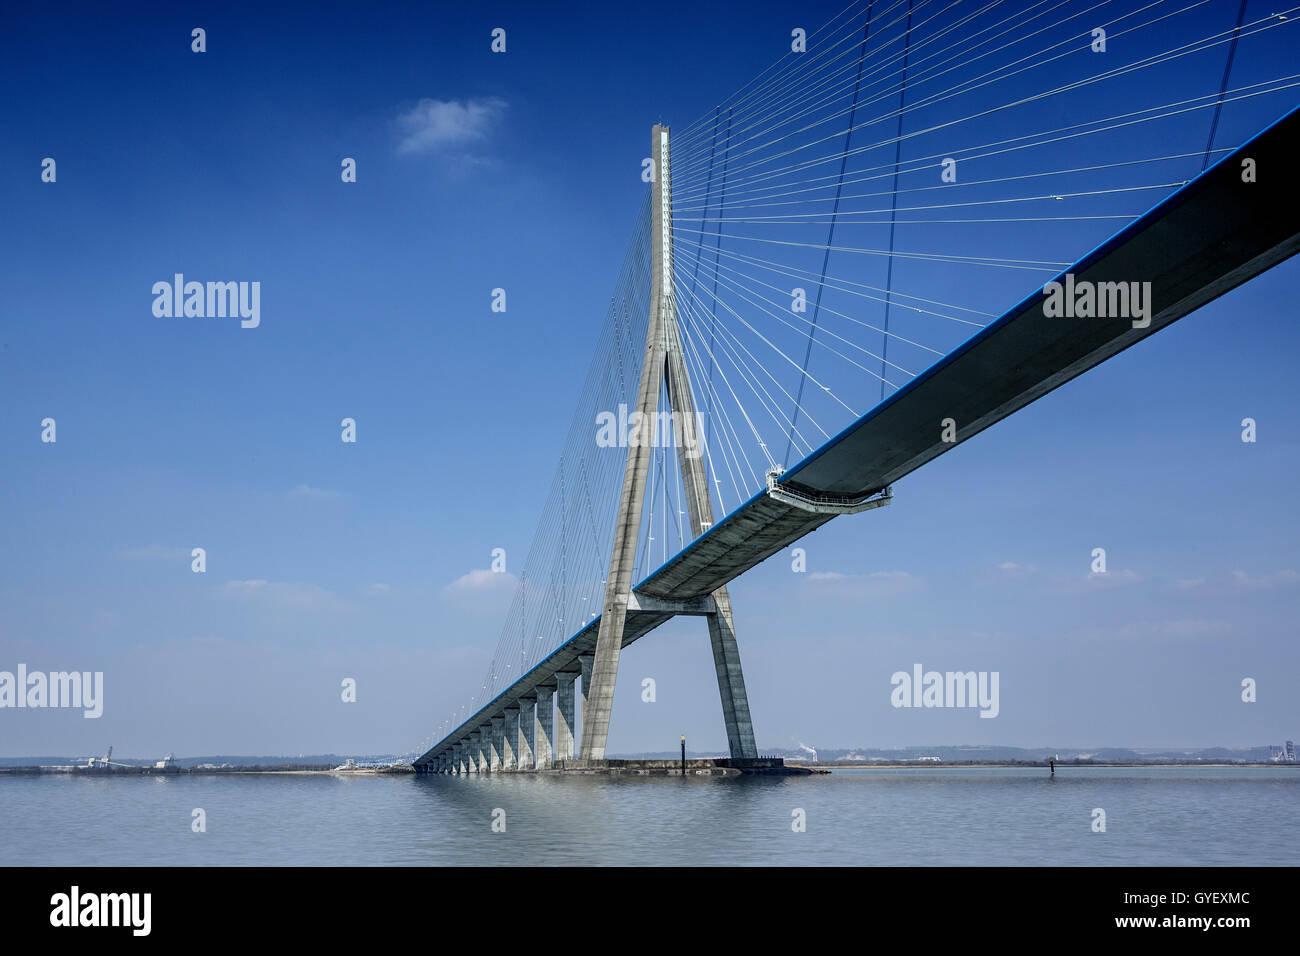 View of the Bridge Pont de Normandie on a sunny autumn day in Normandy France crossing the river Seine Stock Photo